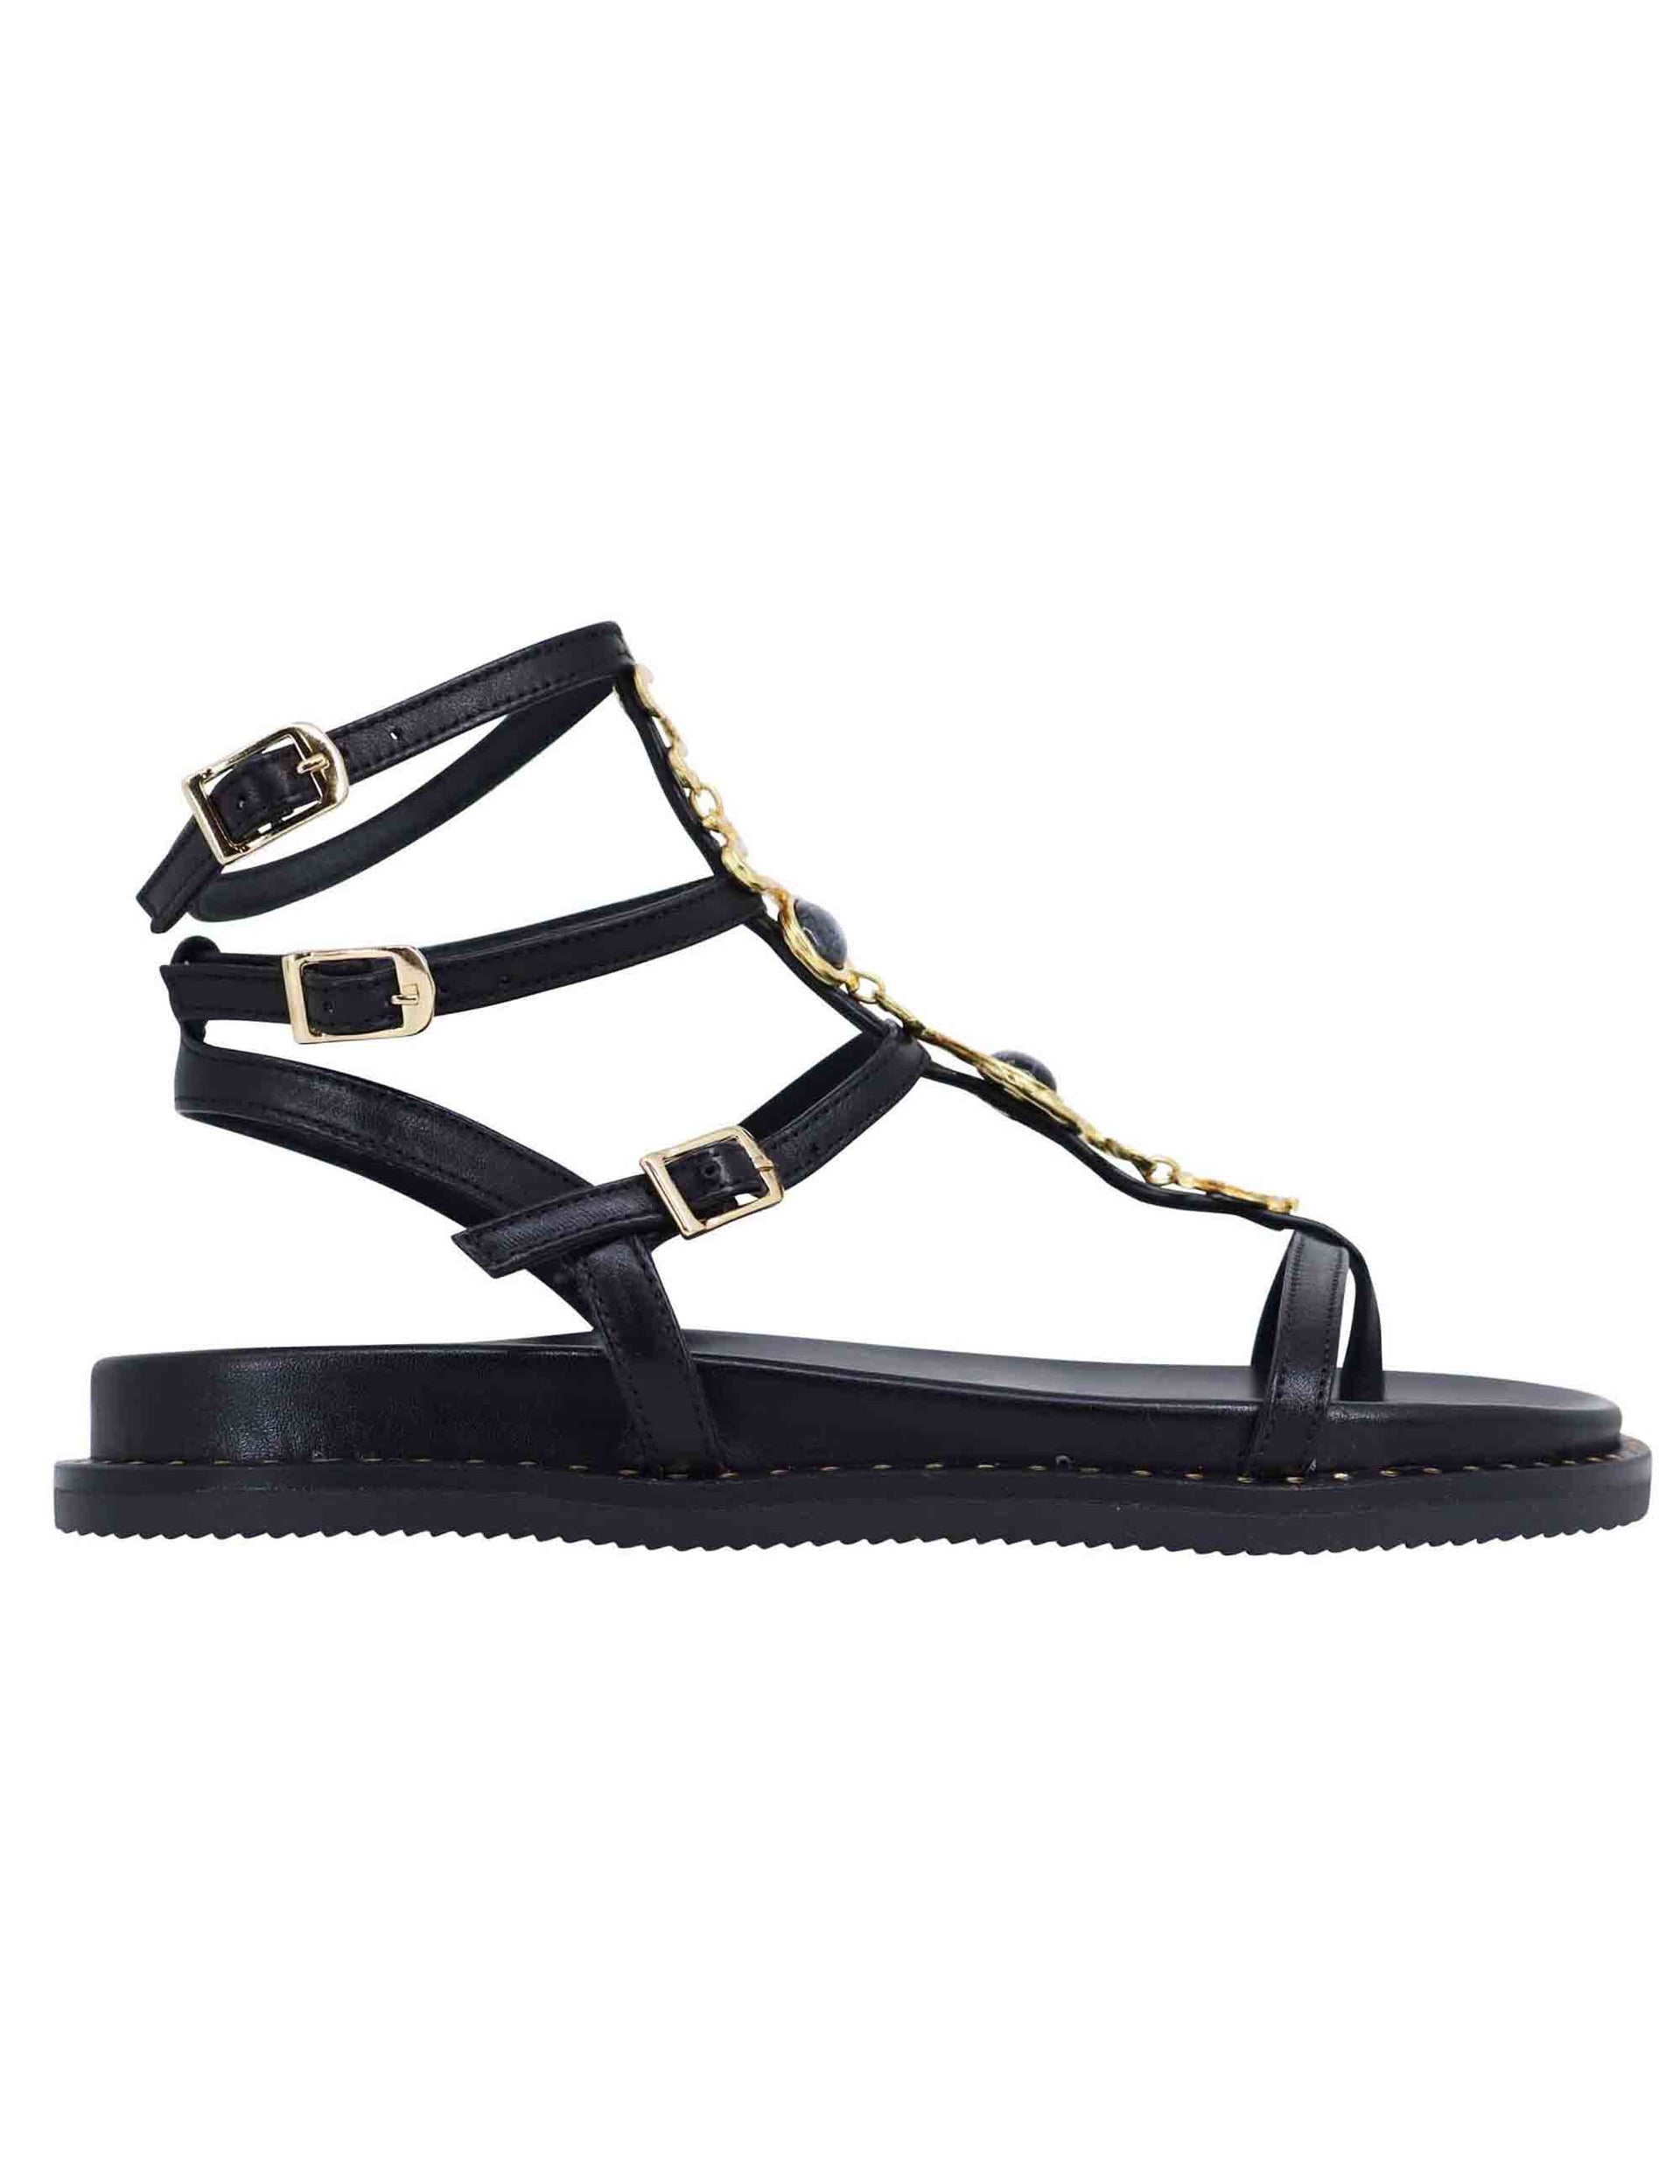 Women's flat flip-flop sandals in black leather with studs and ankle straps